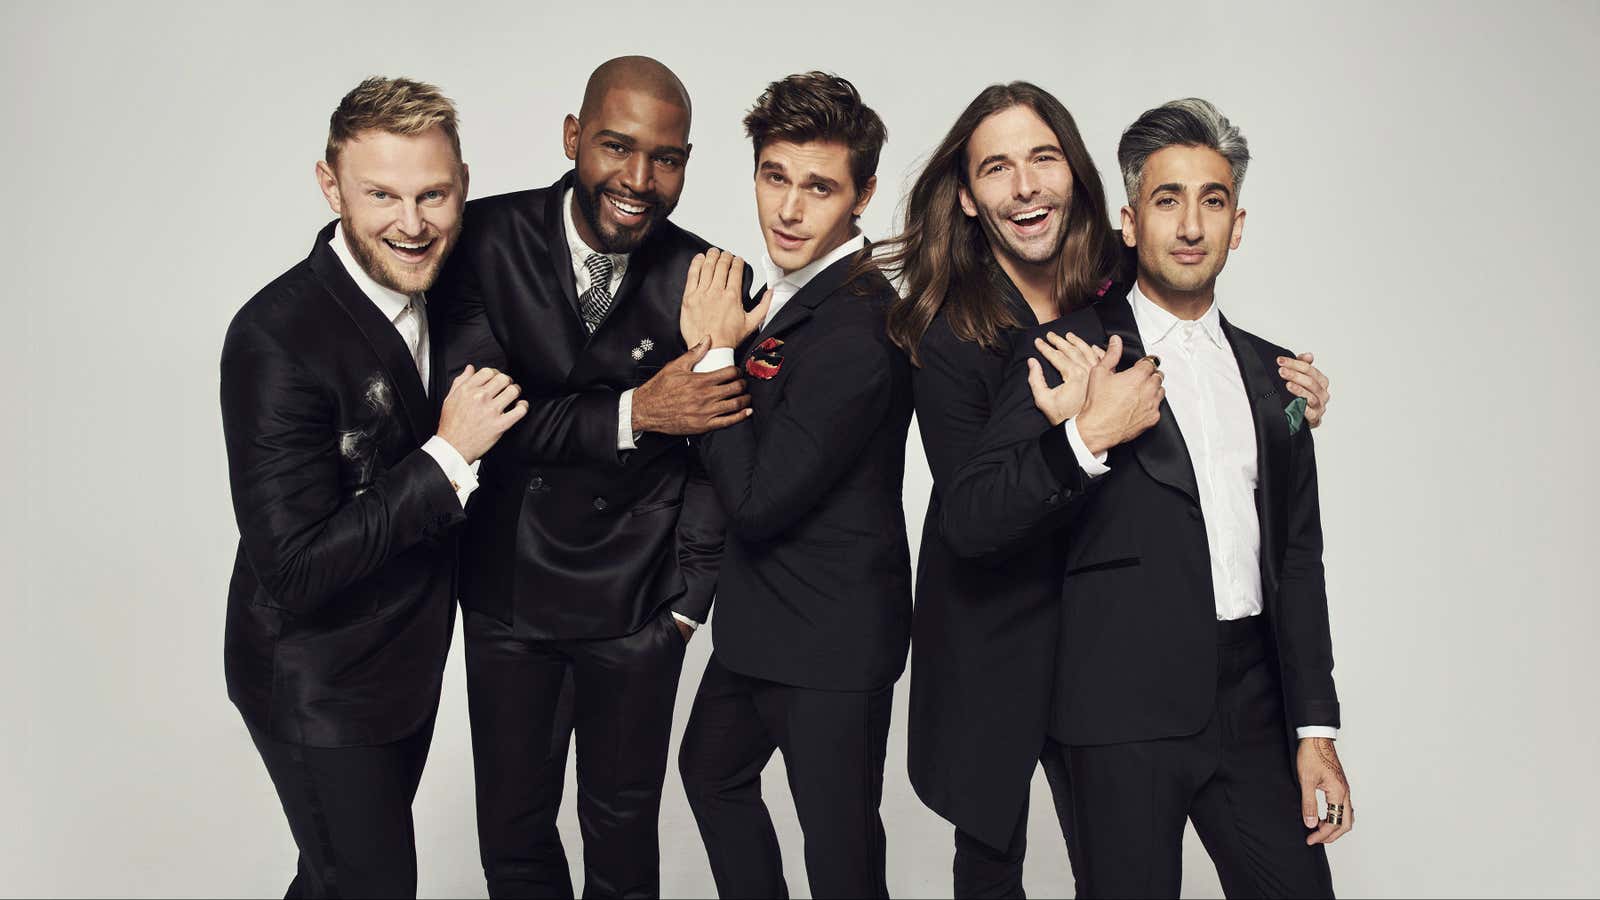 “Queer Eye” treats consumption like the antidote to toxic masculinity